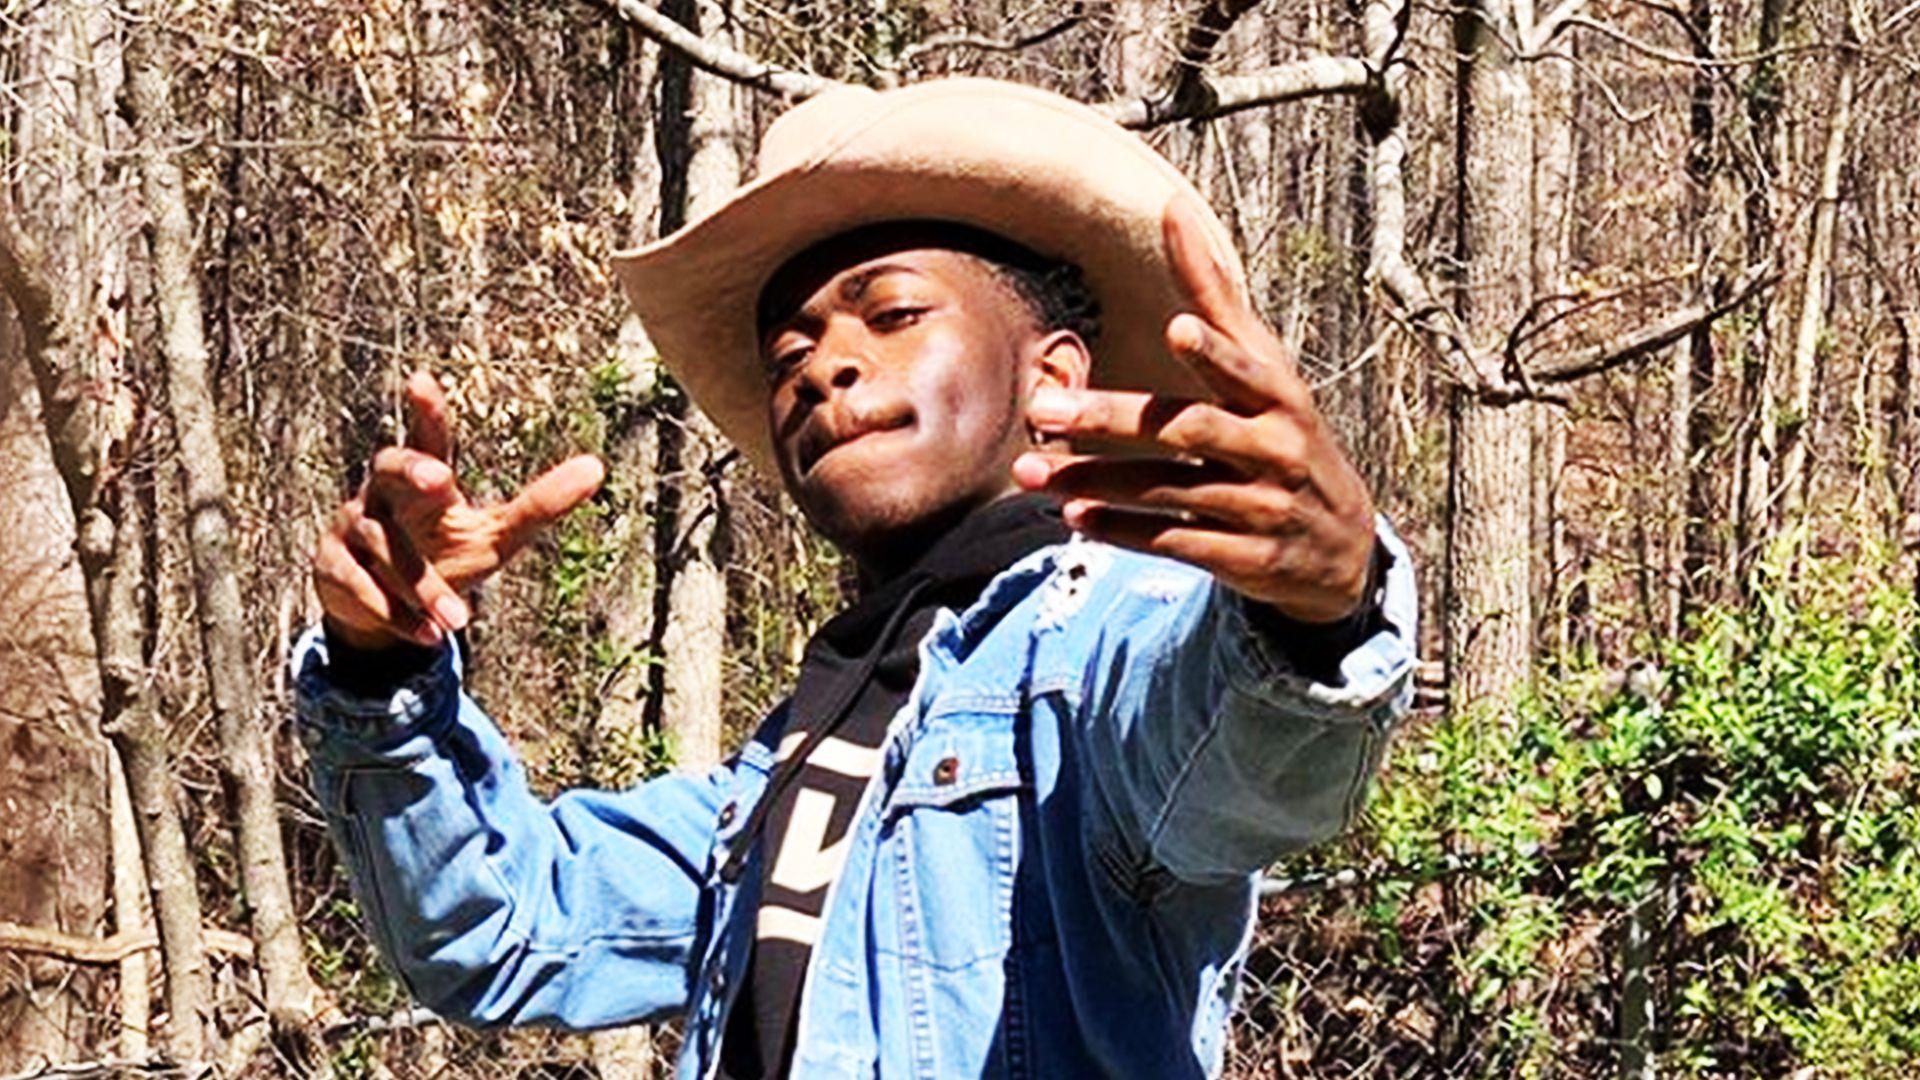 Old Town Road' by Lil Nas X No. 1 on 'Billboard' Chart